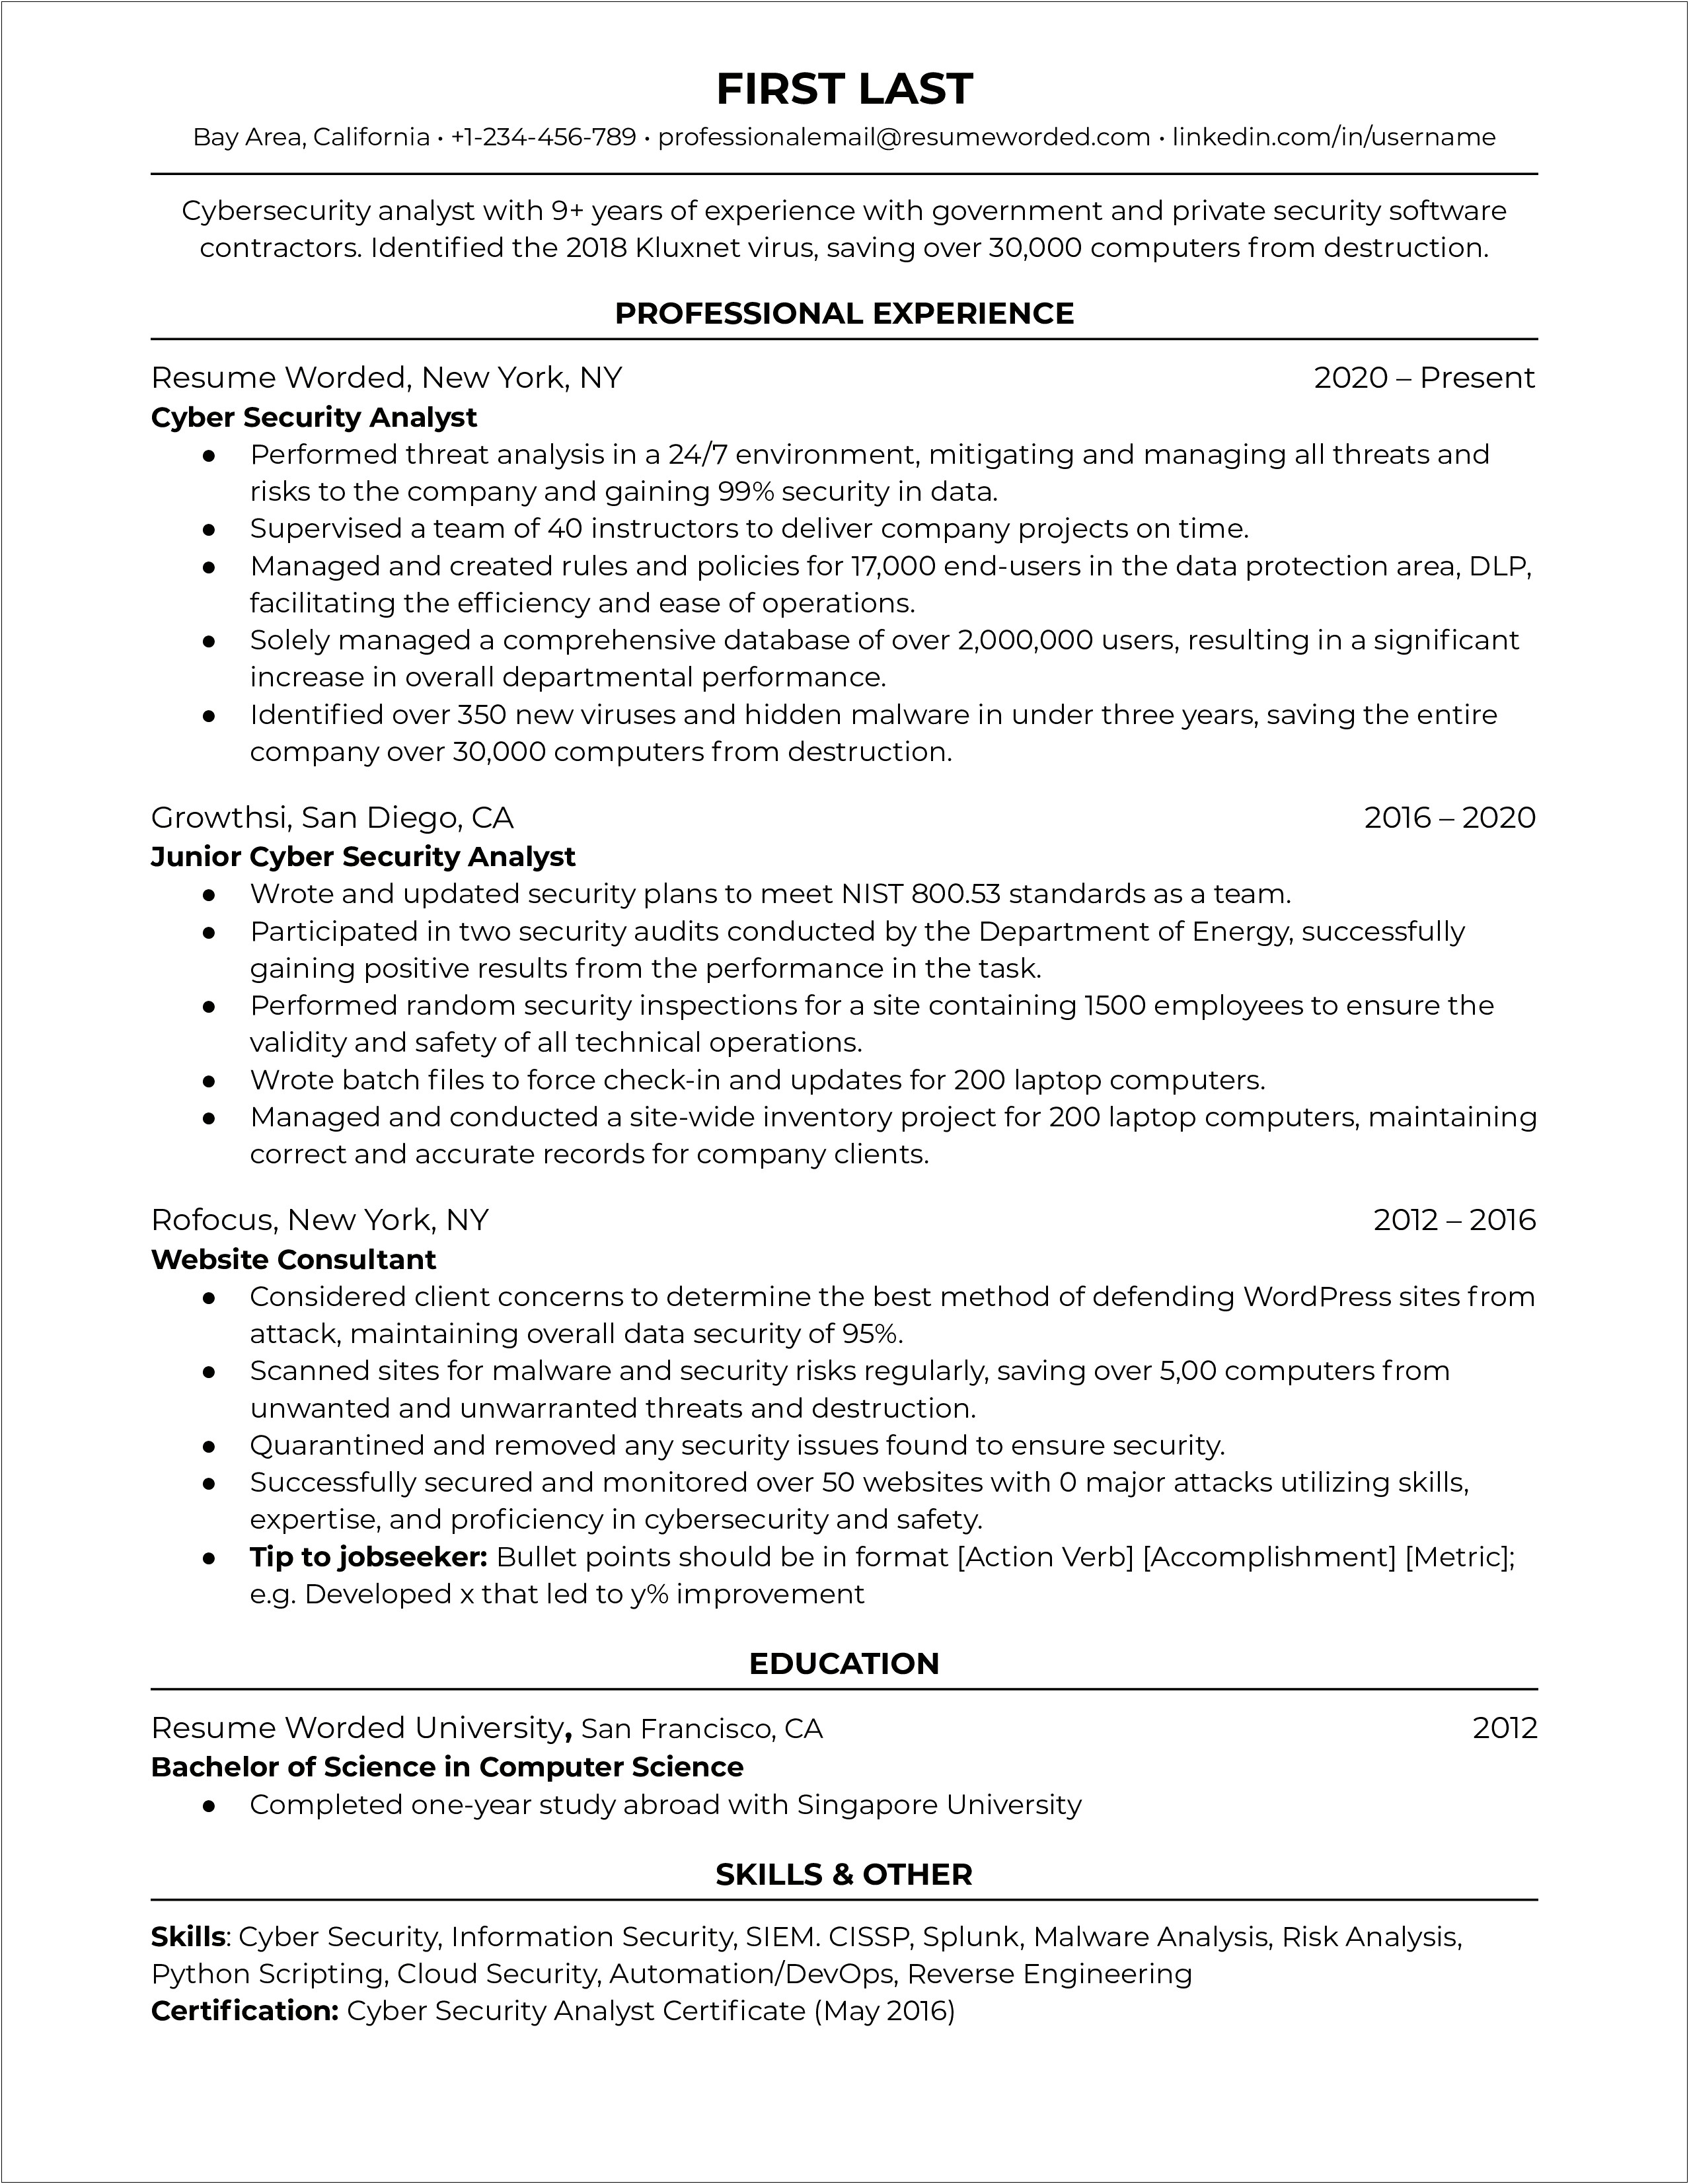 Transitional Resume Summary From Engineer To Cyber Security